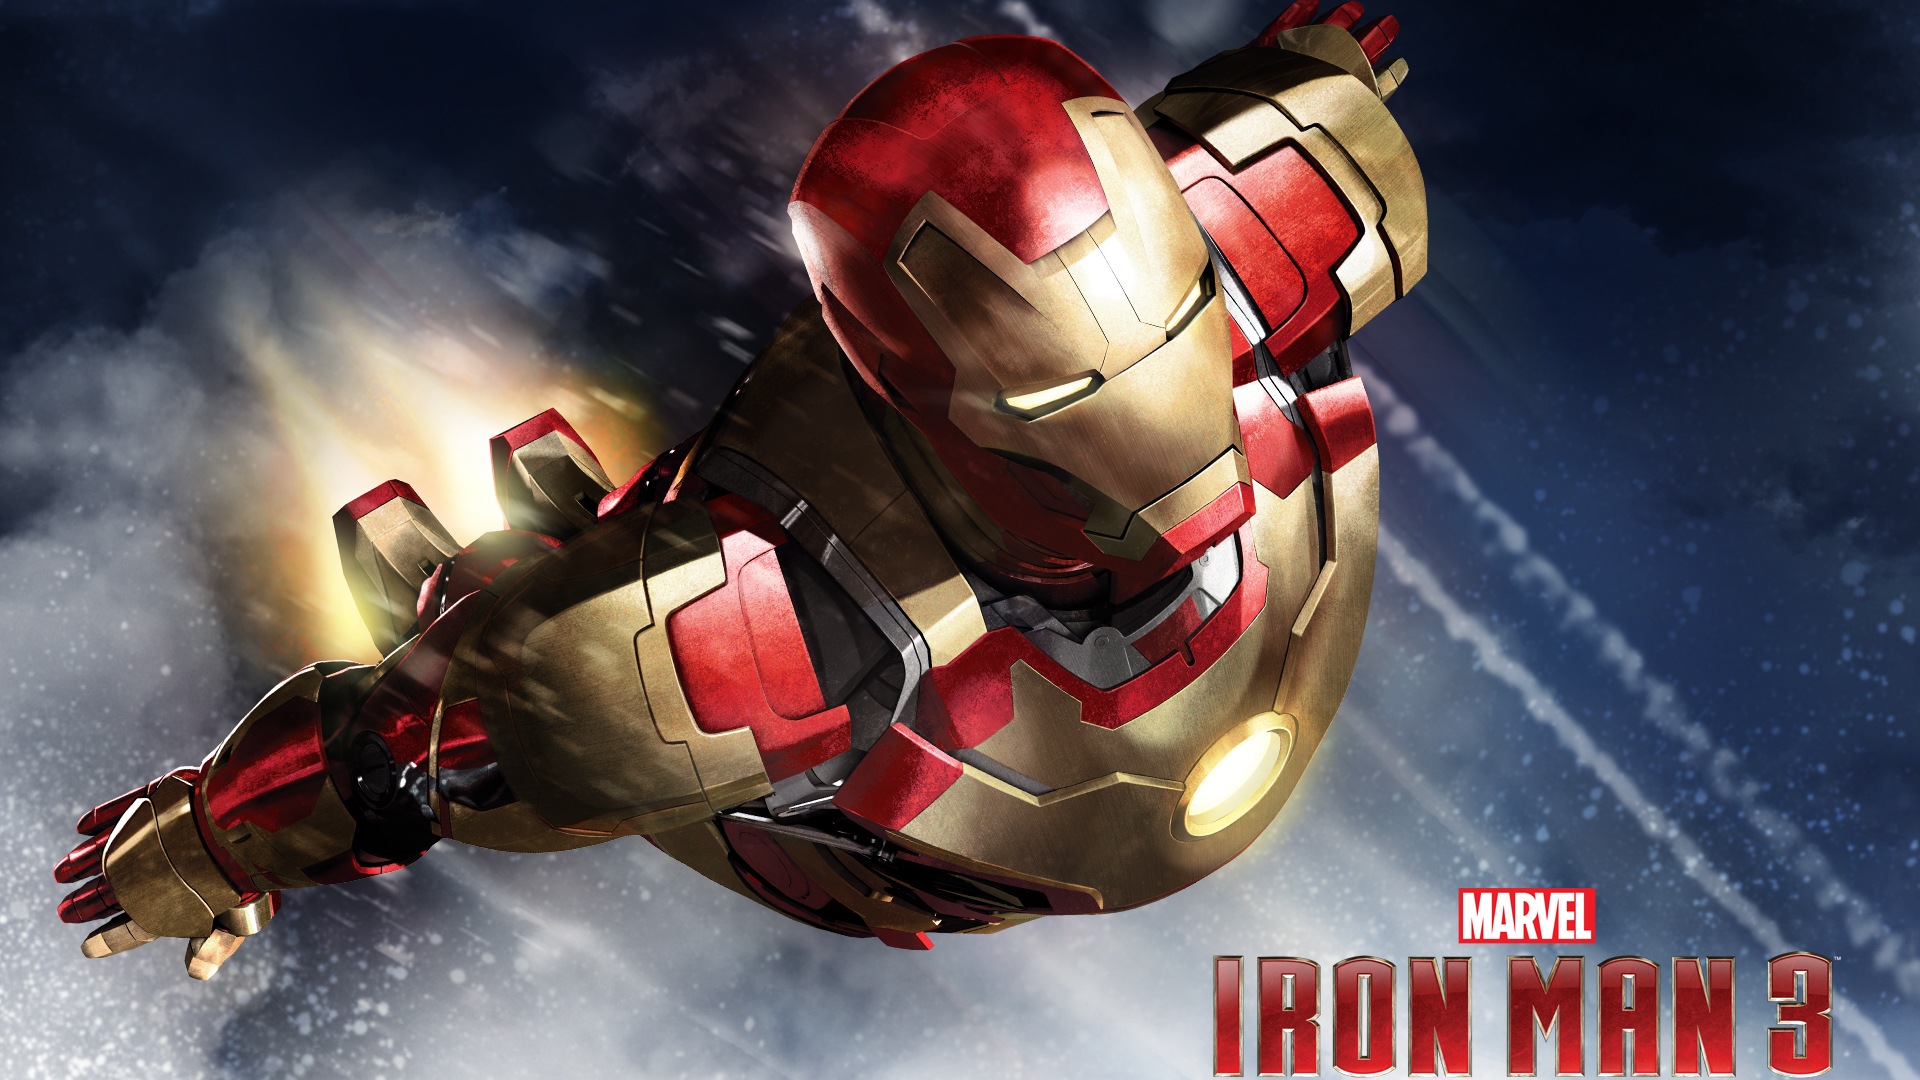 2013 Iron Man 3 newest HD wallpapers #5 - 1920x1080